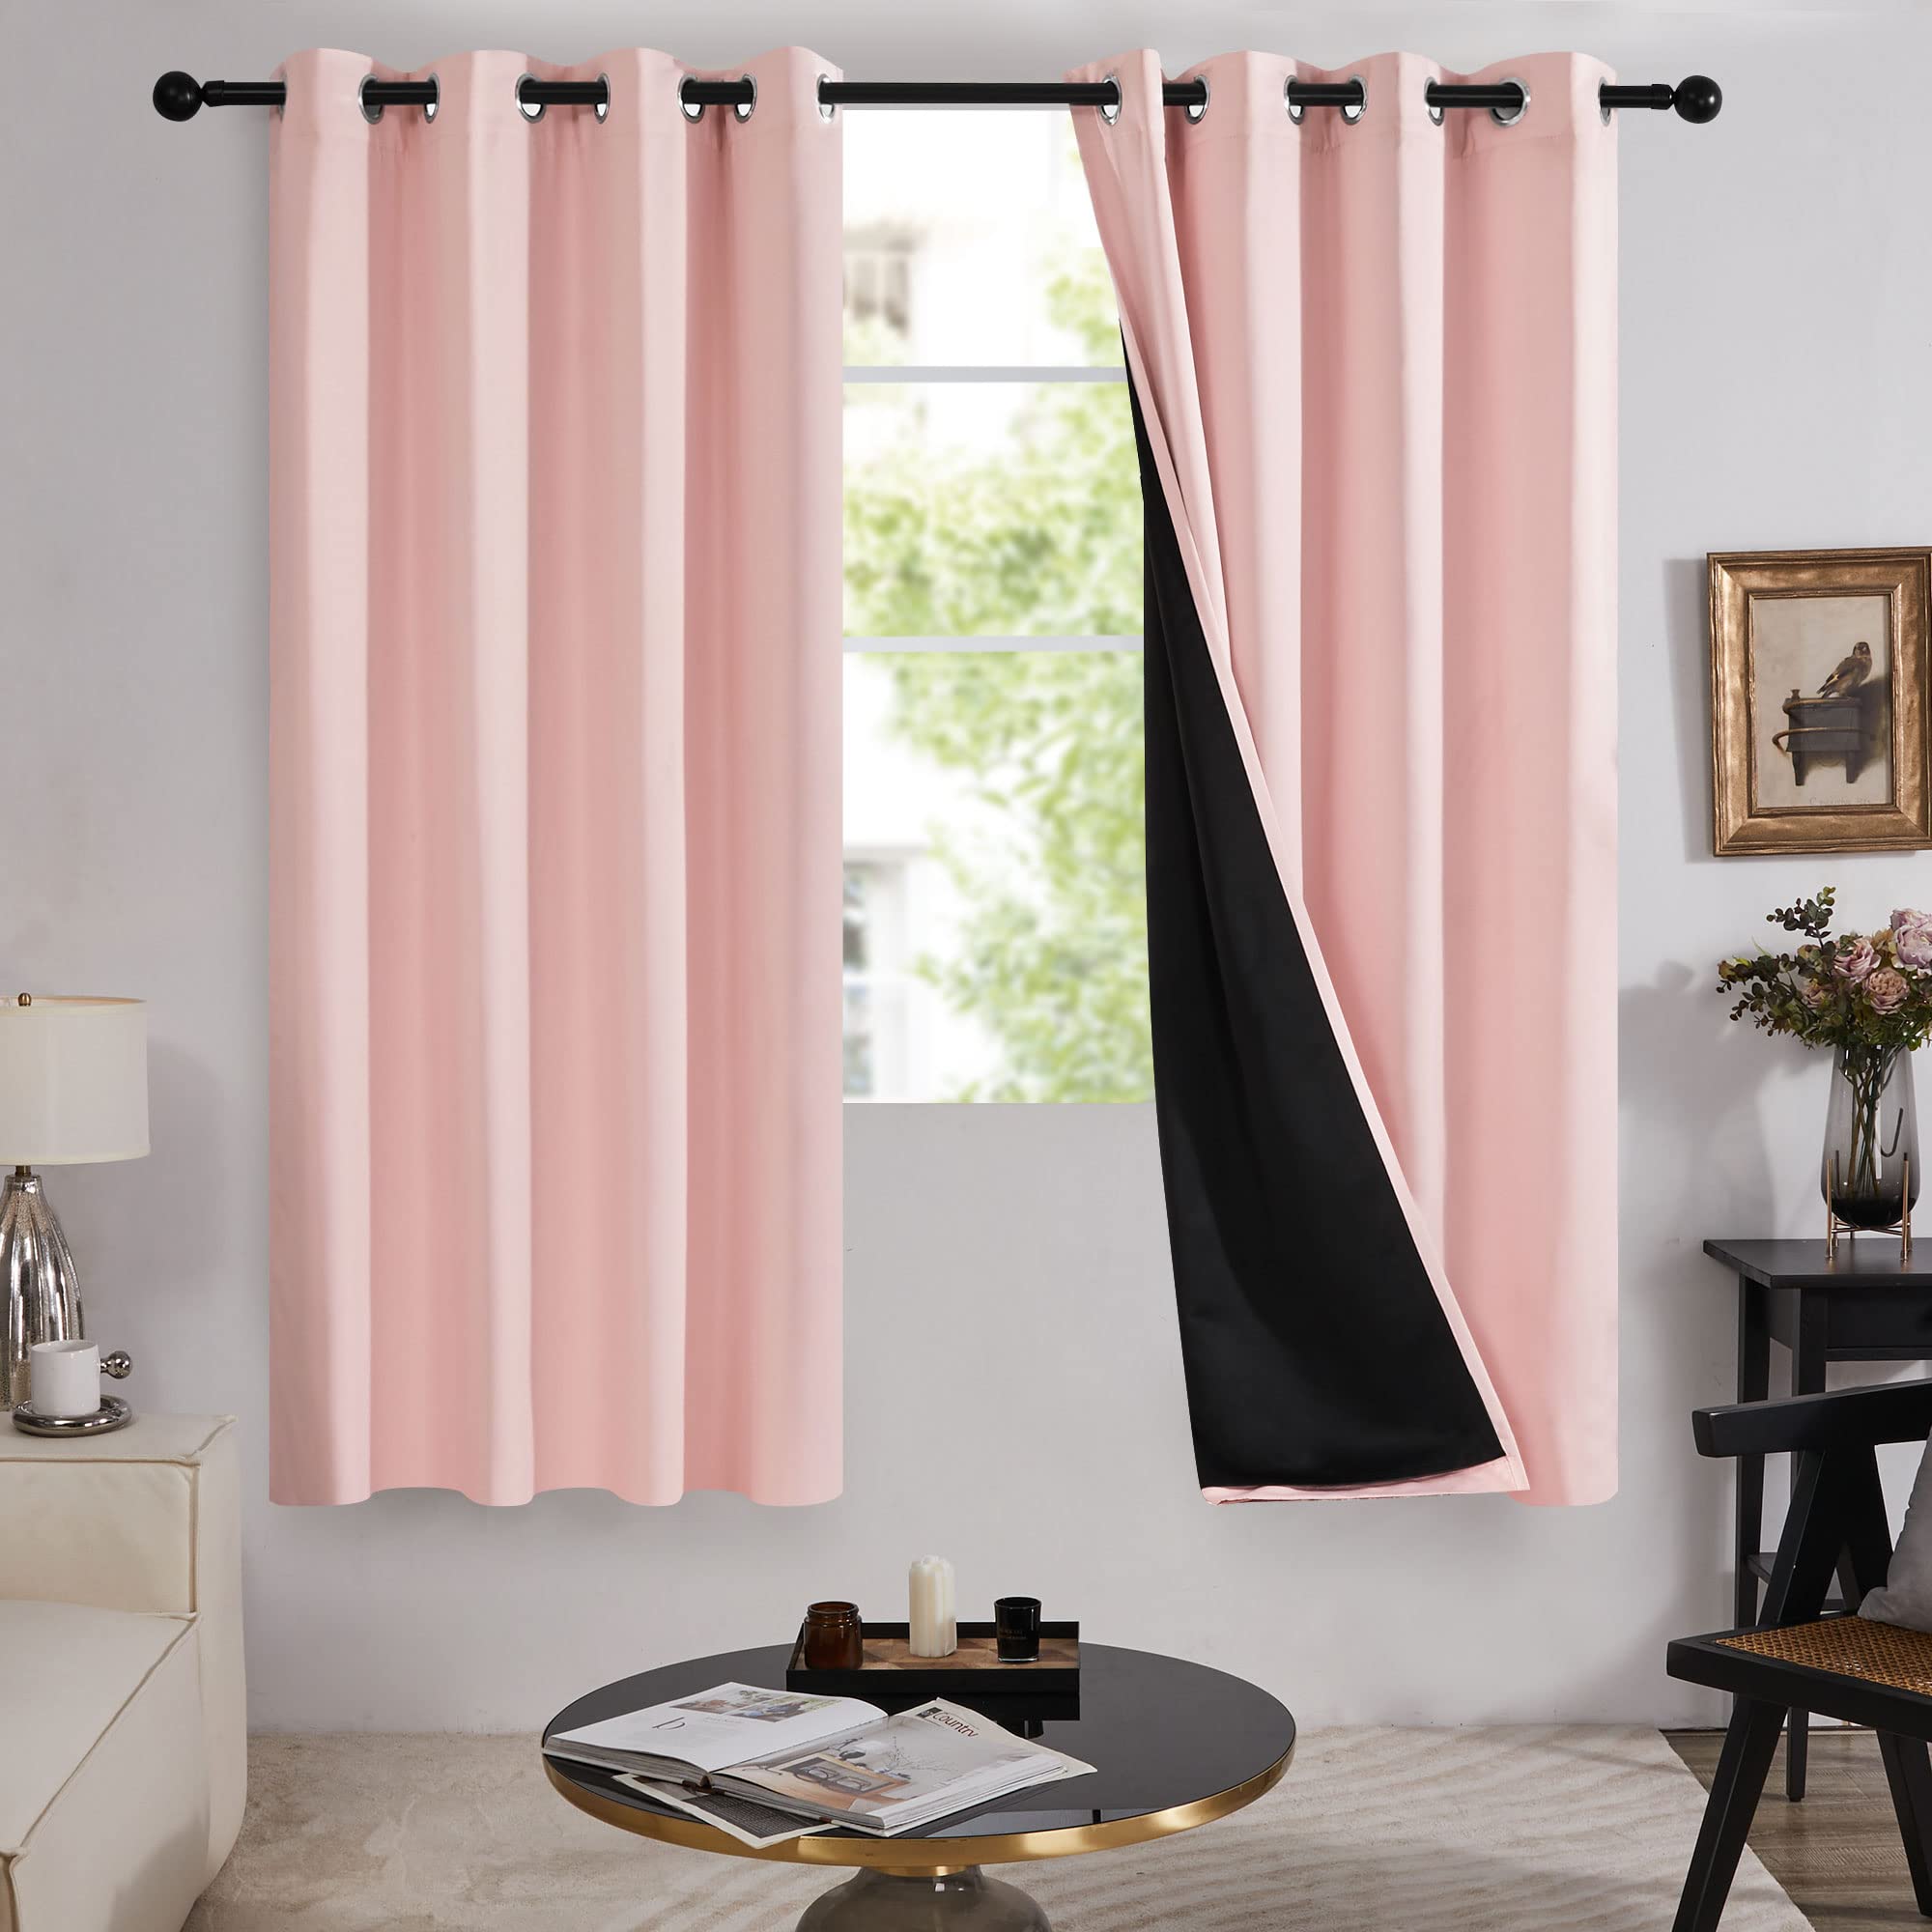 Deconovo 100% Blackout curtain 72 Inches Long, Pink curtain Sets, Total Sun Block, Noise Reducing, Thermal Insulated Window Drap